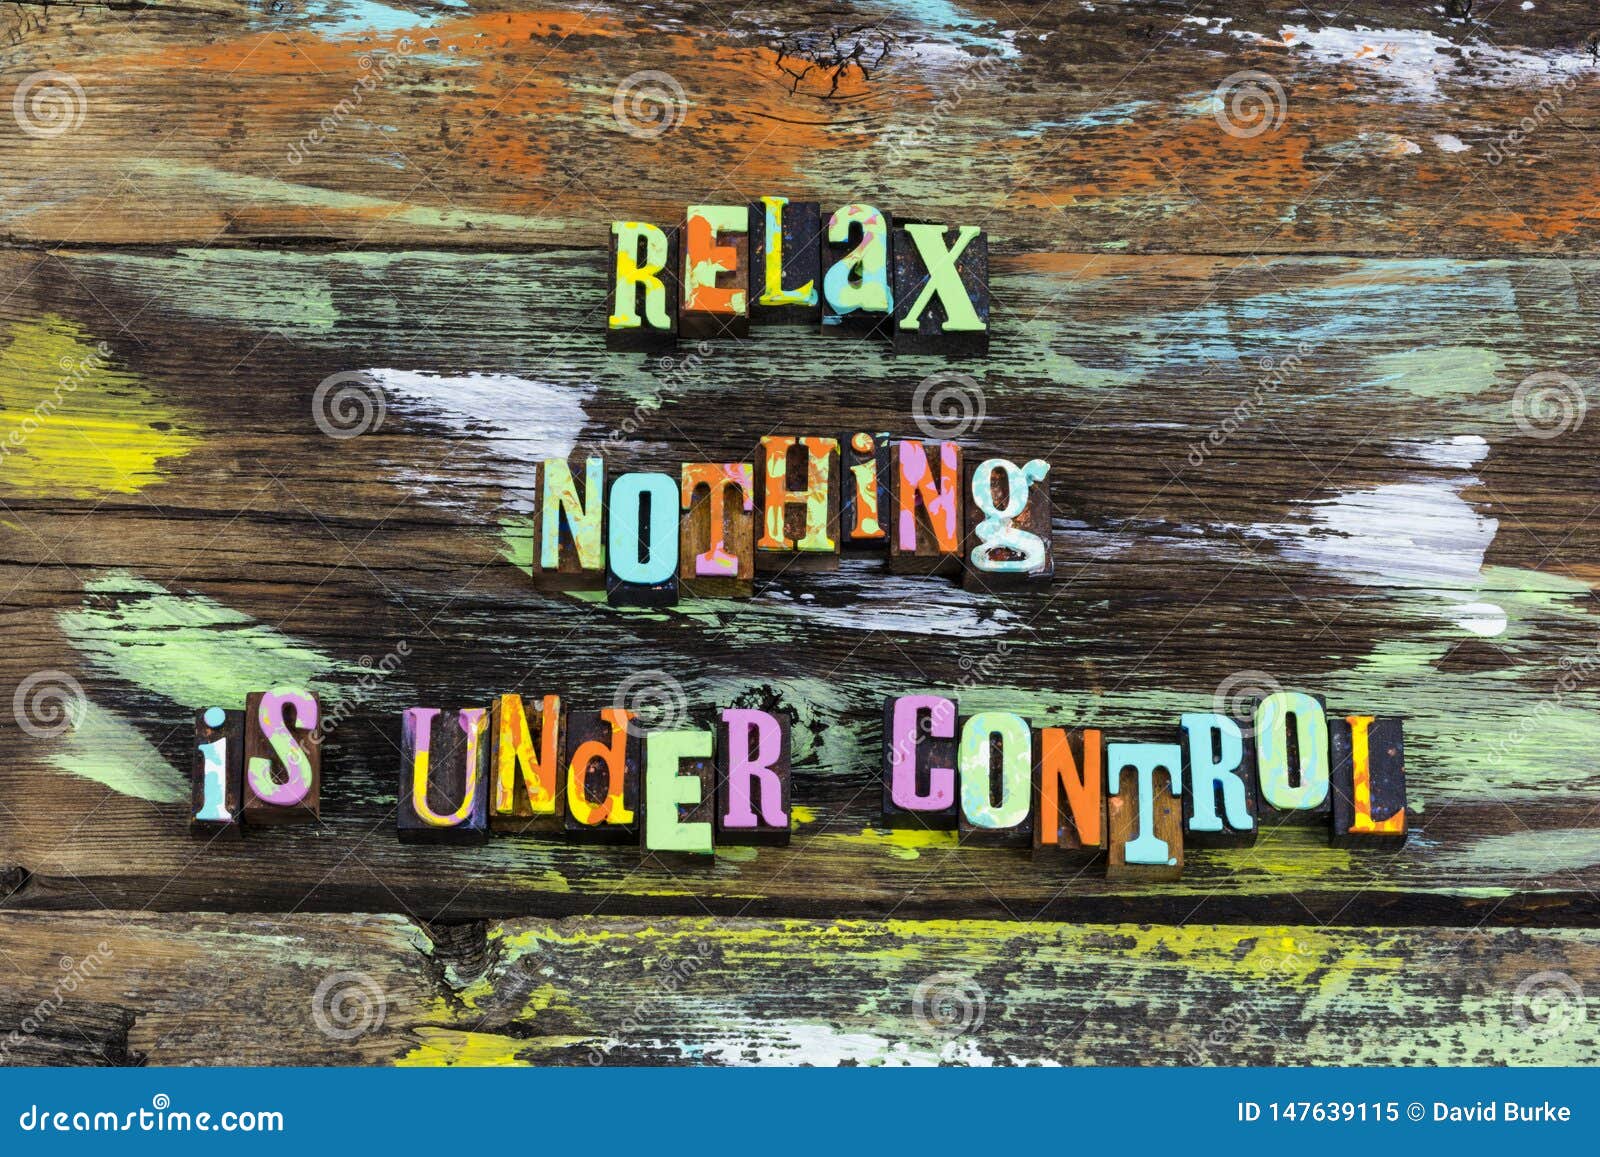 relax relaxation life control learn personal unknown reduce stress imagination